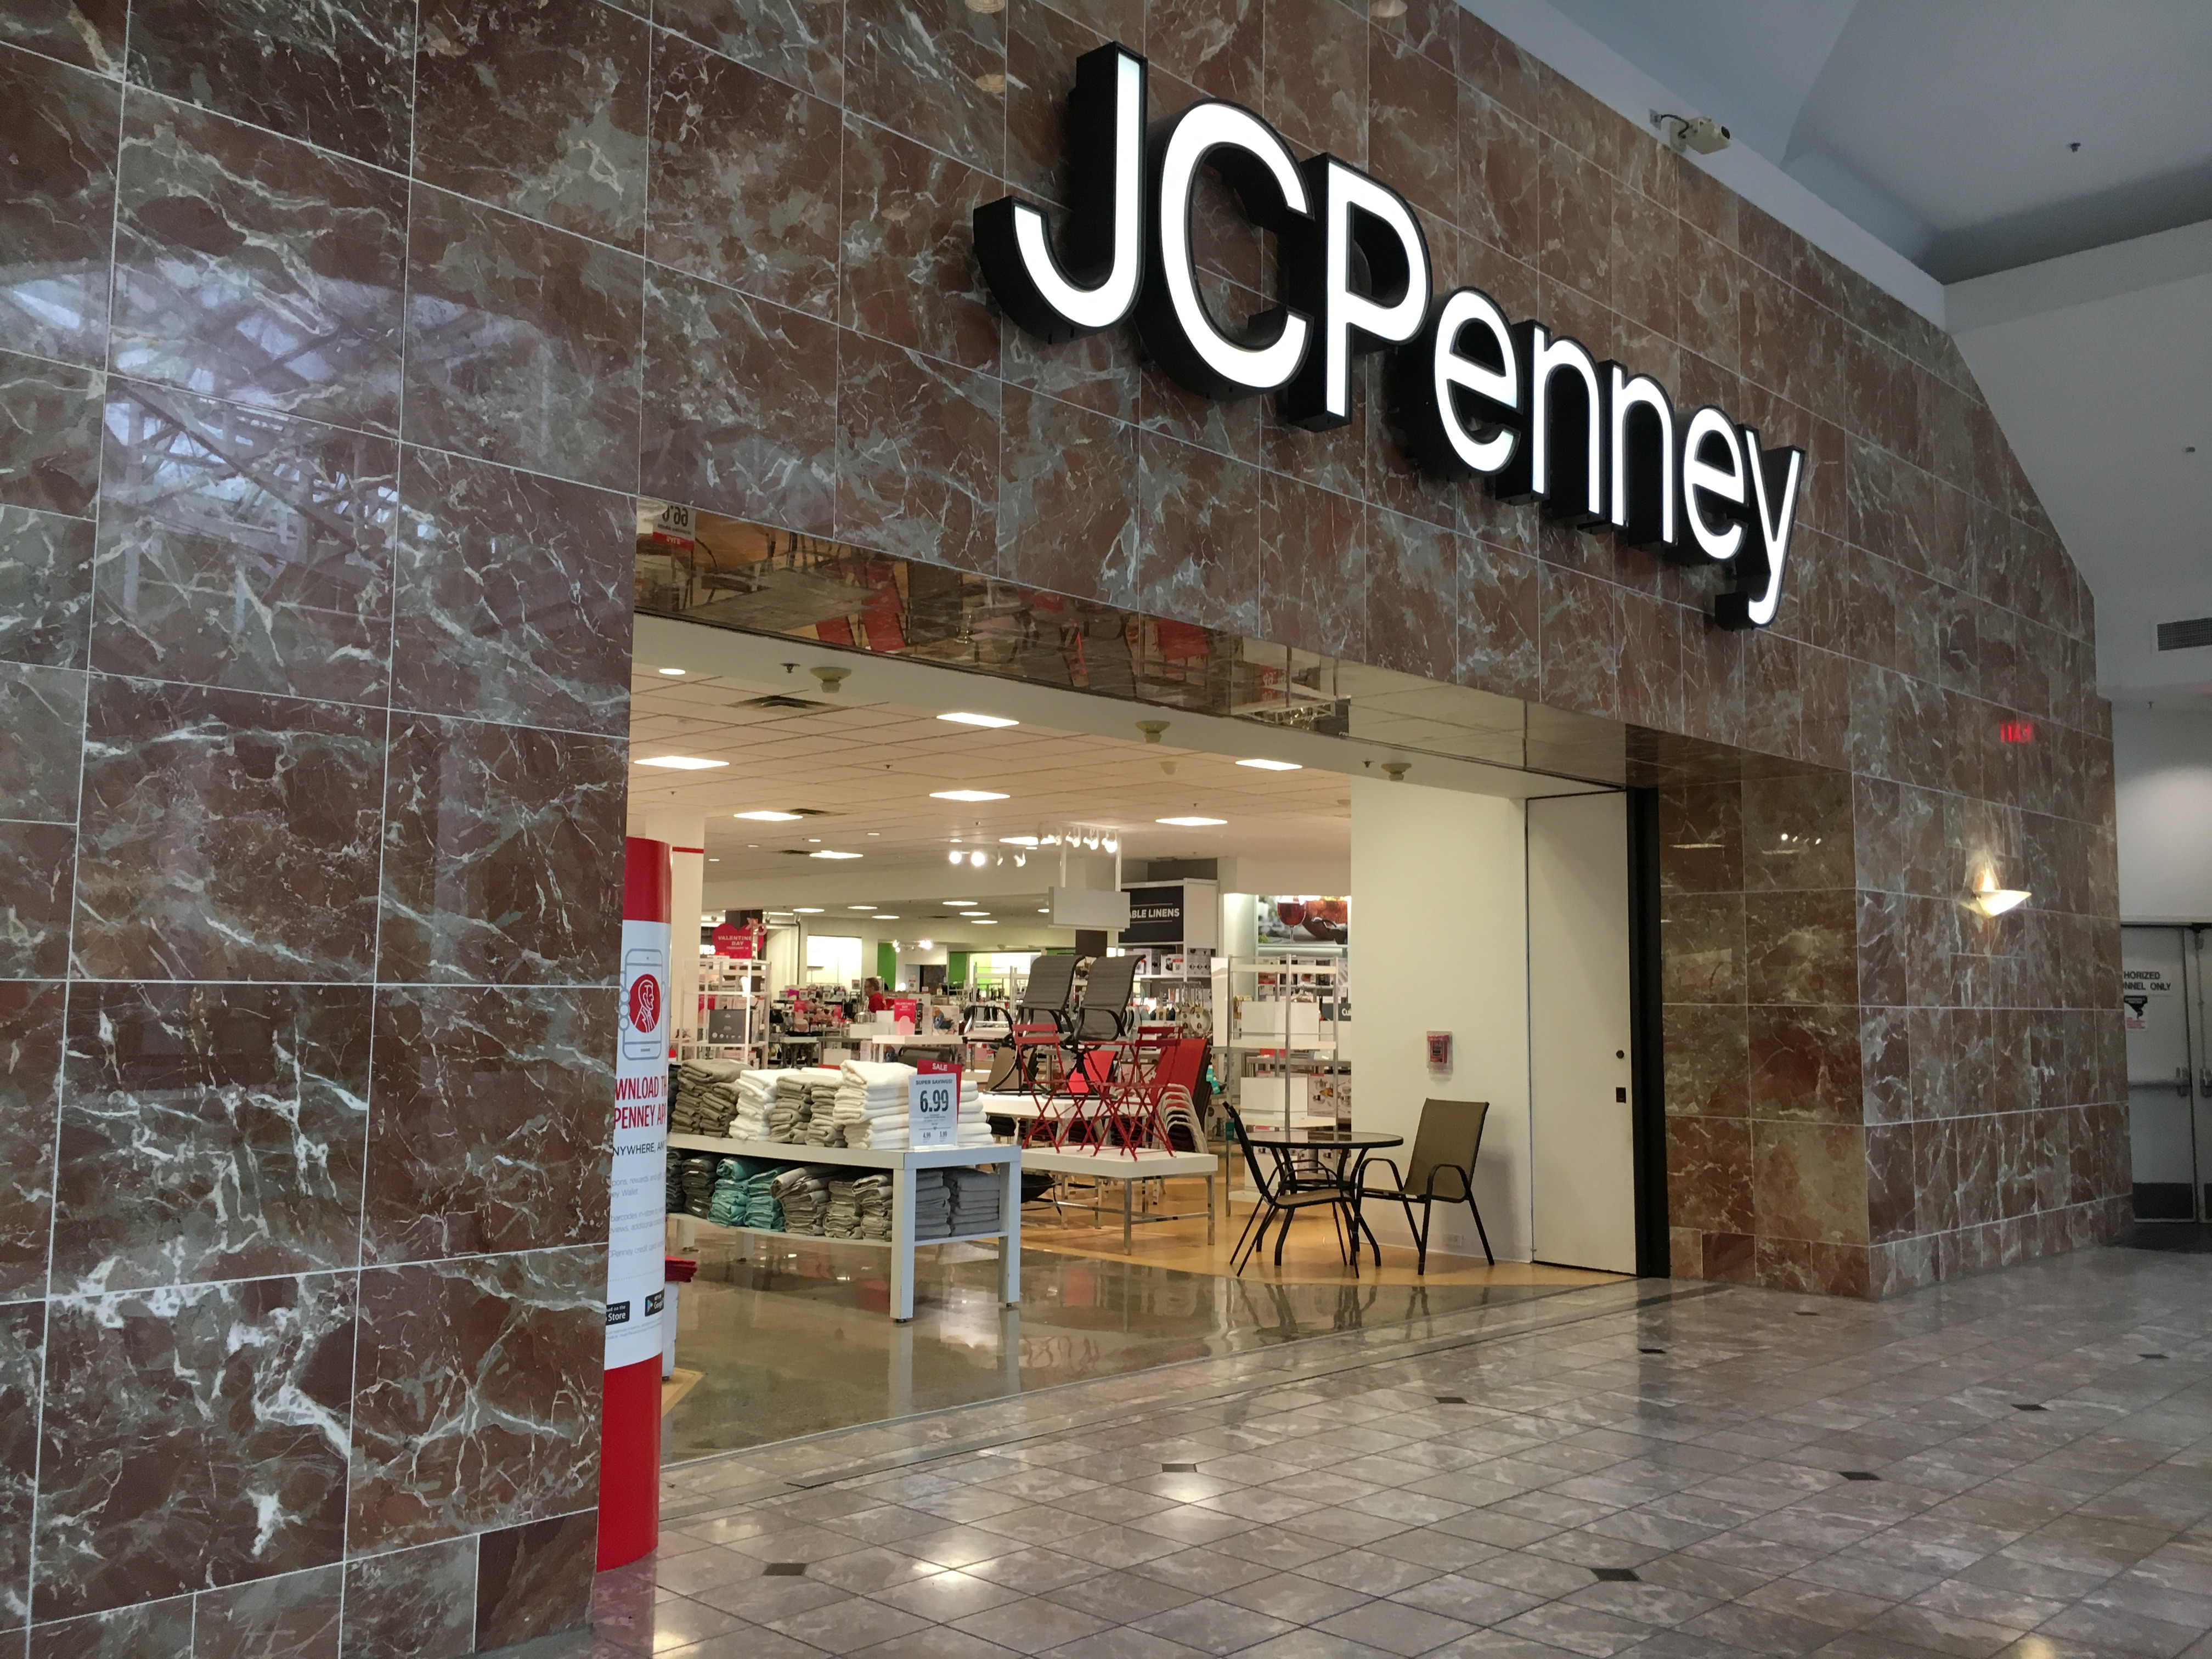 JCPenney planning more store closures as sales drop